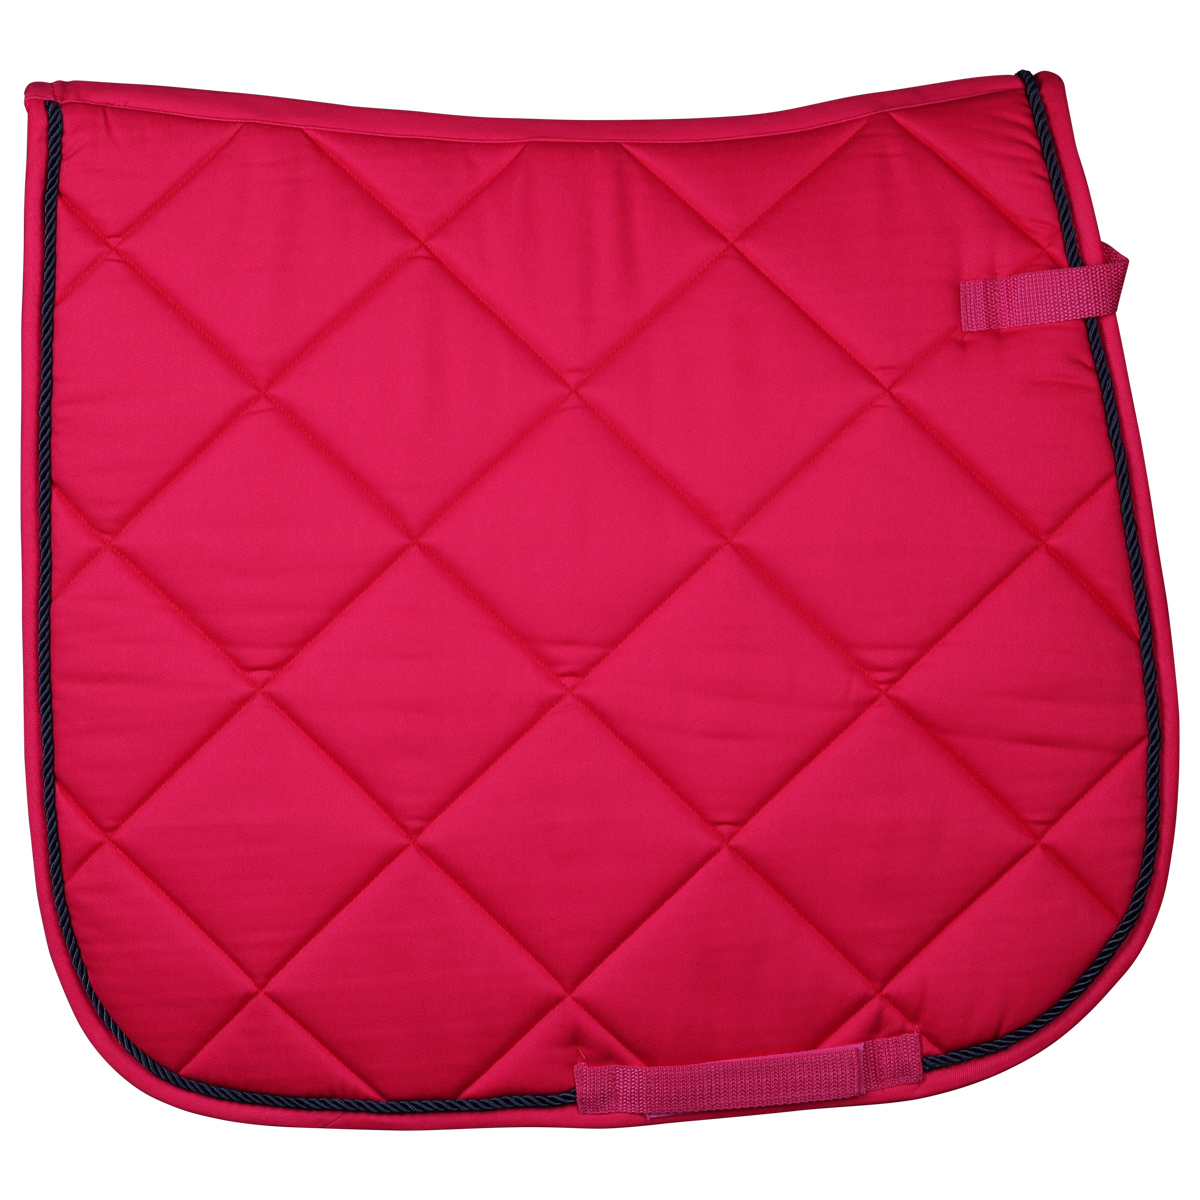 Equestrian Saddle Cover & Bridle Bag Set Comes With Free Grooming Mitt 